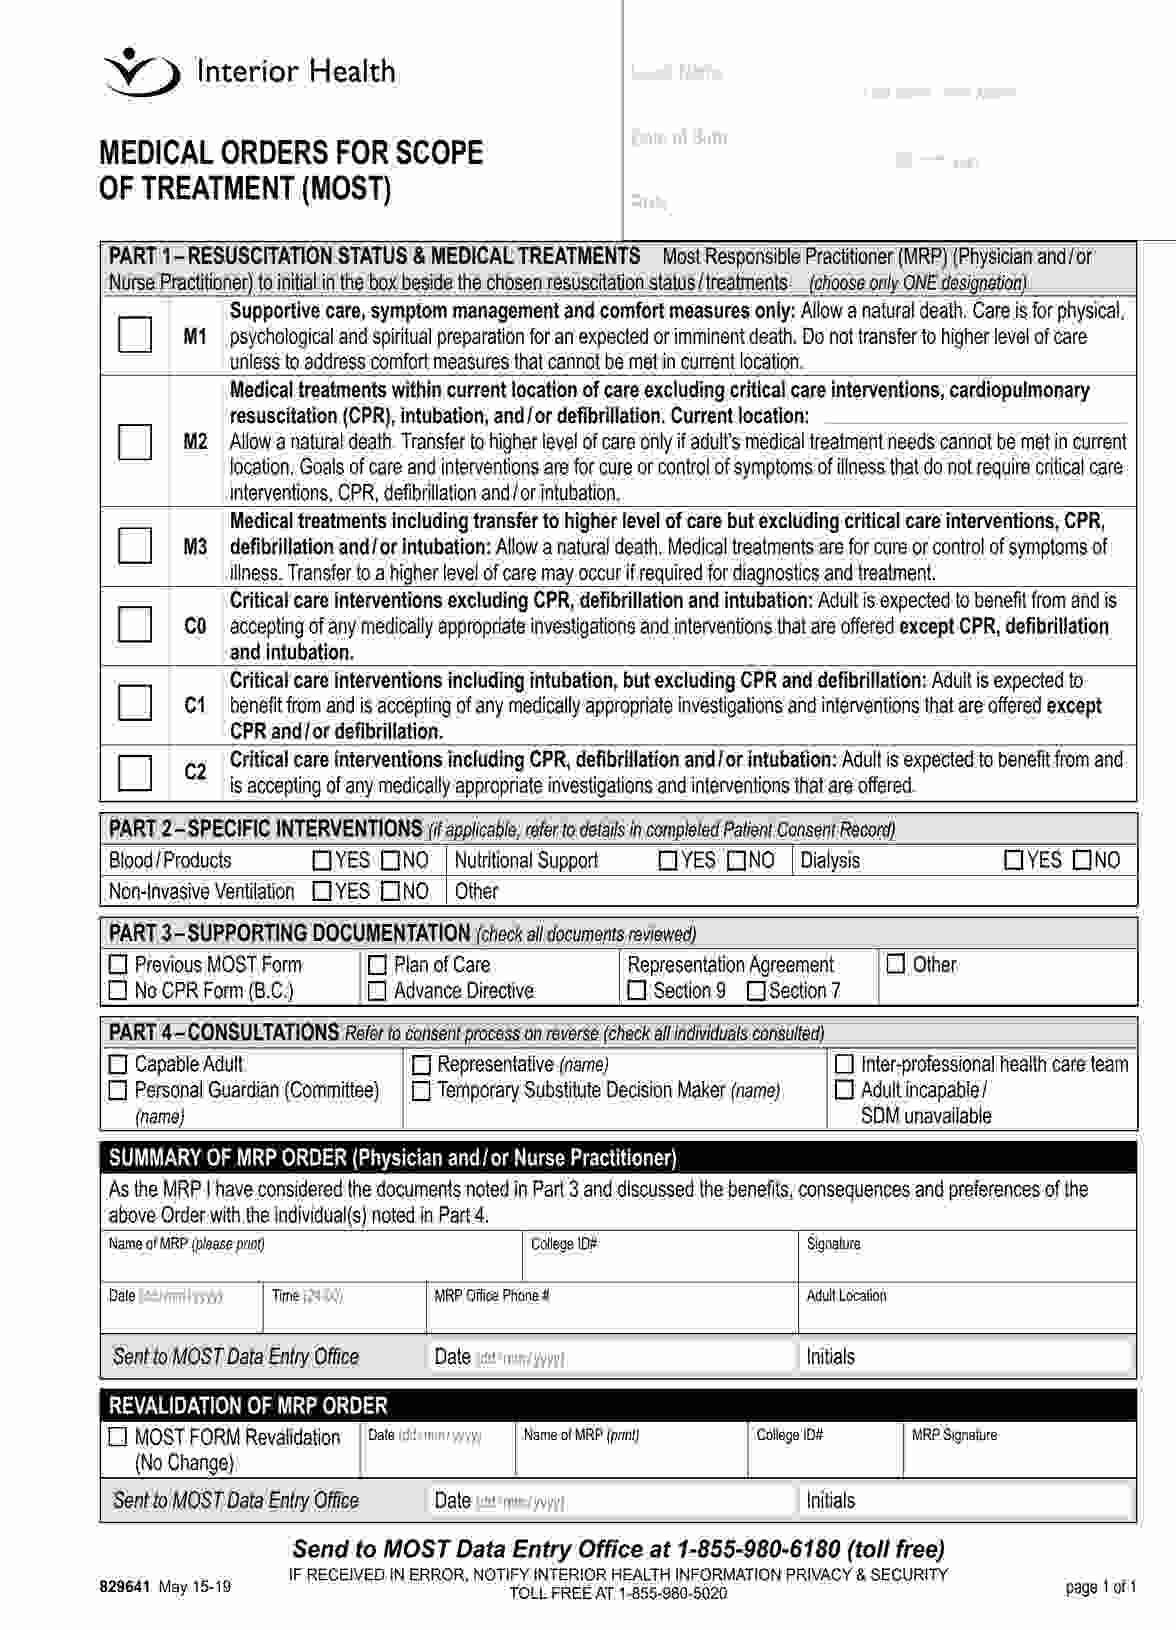 MOST Medical Form PDF Example